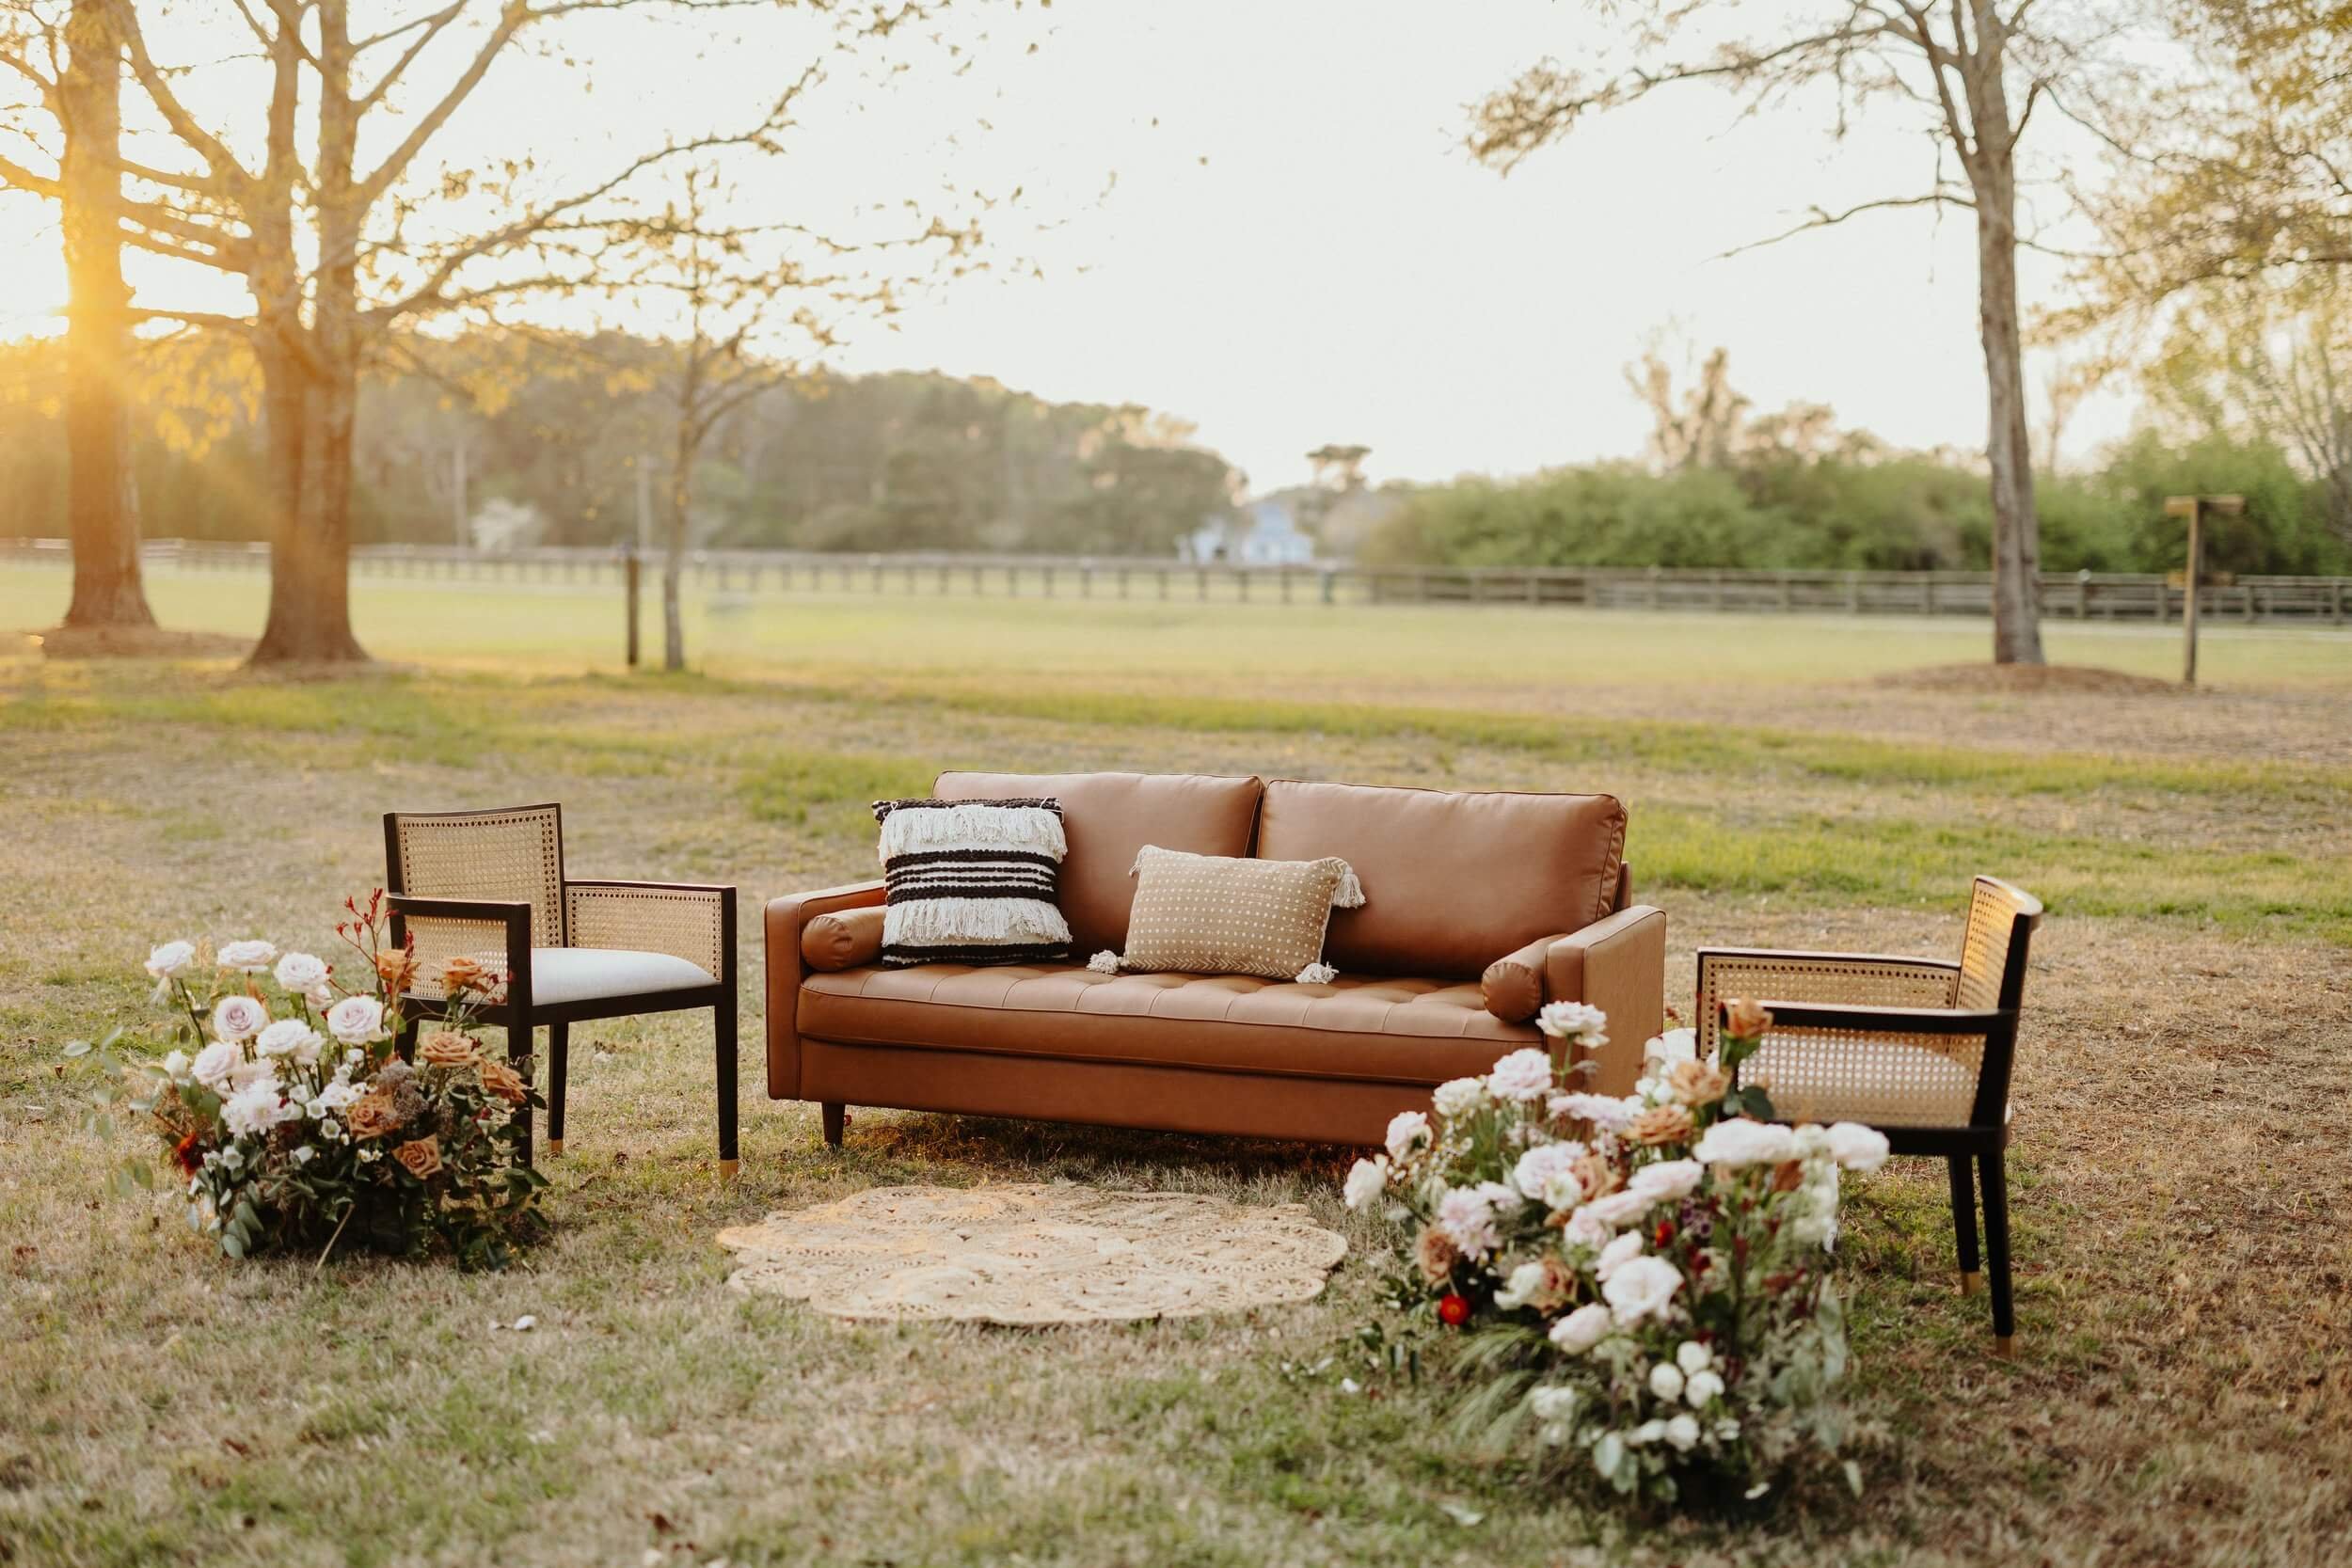  A leather sofa rental and chairs at event venue with flowers 